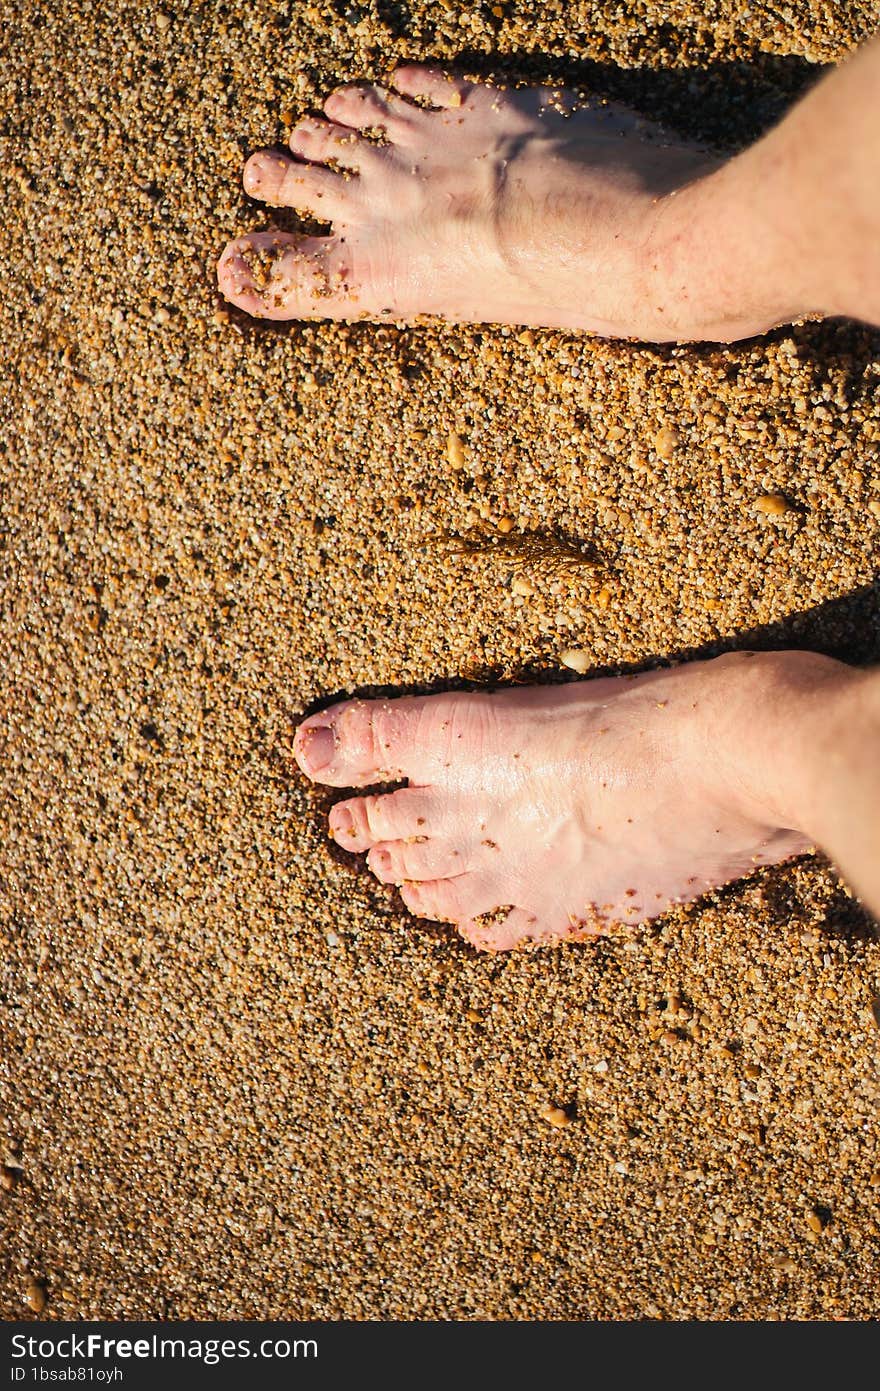 Men s feet are standing on a sandy beach. Crystal water on the seashore.